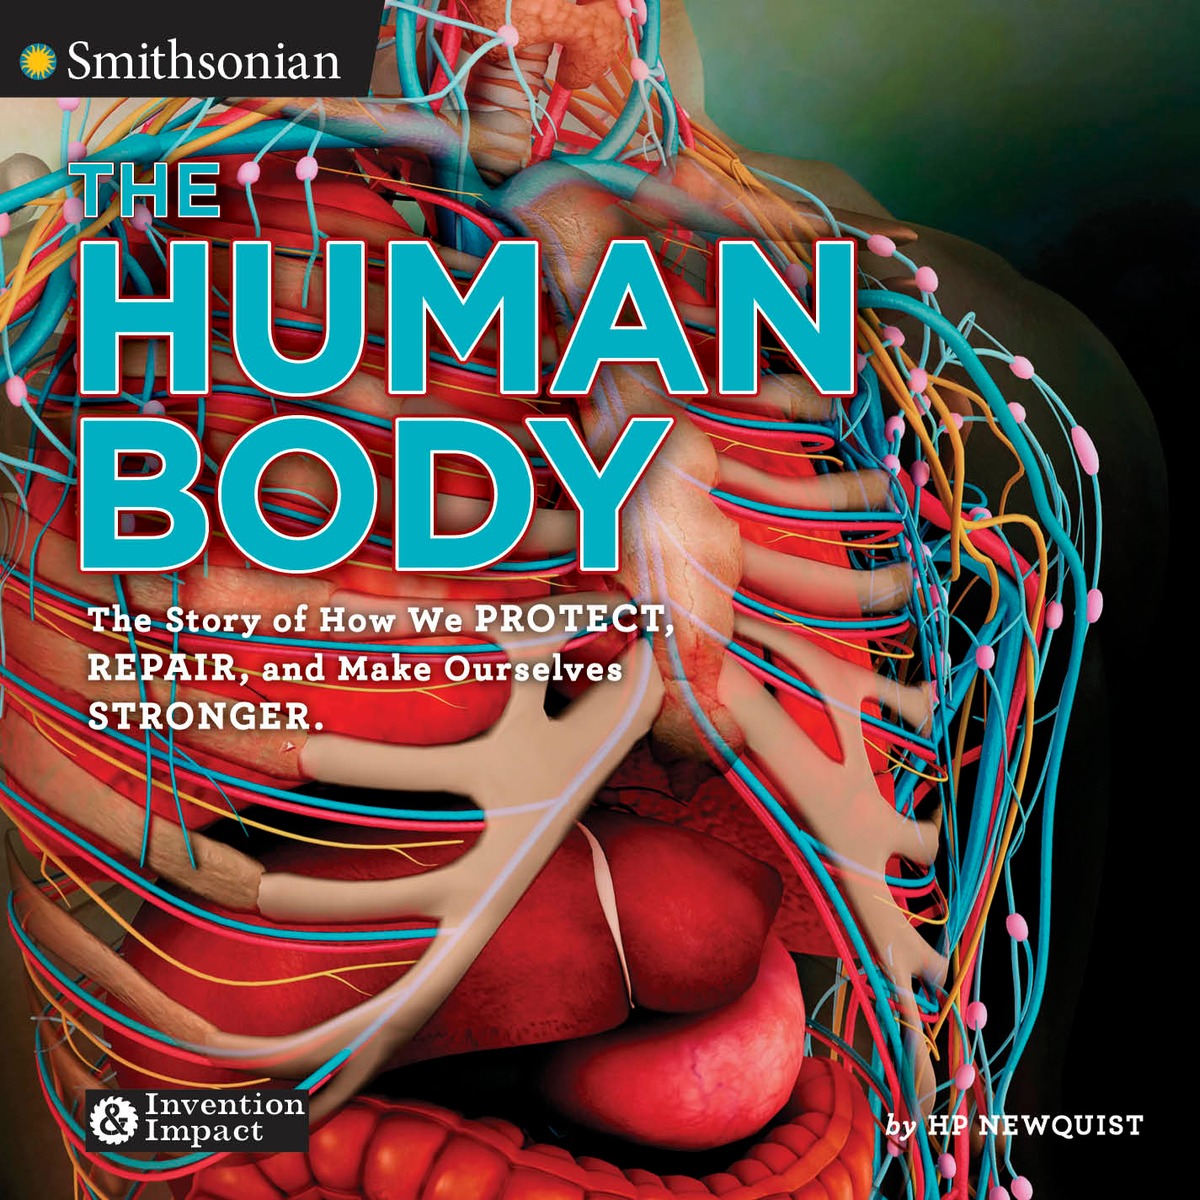 The Human Body: The Story of How We Protect, Repair, and Make Ourselves Stronger